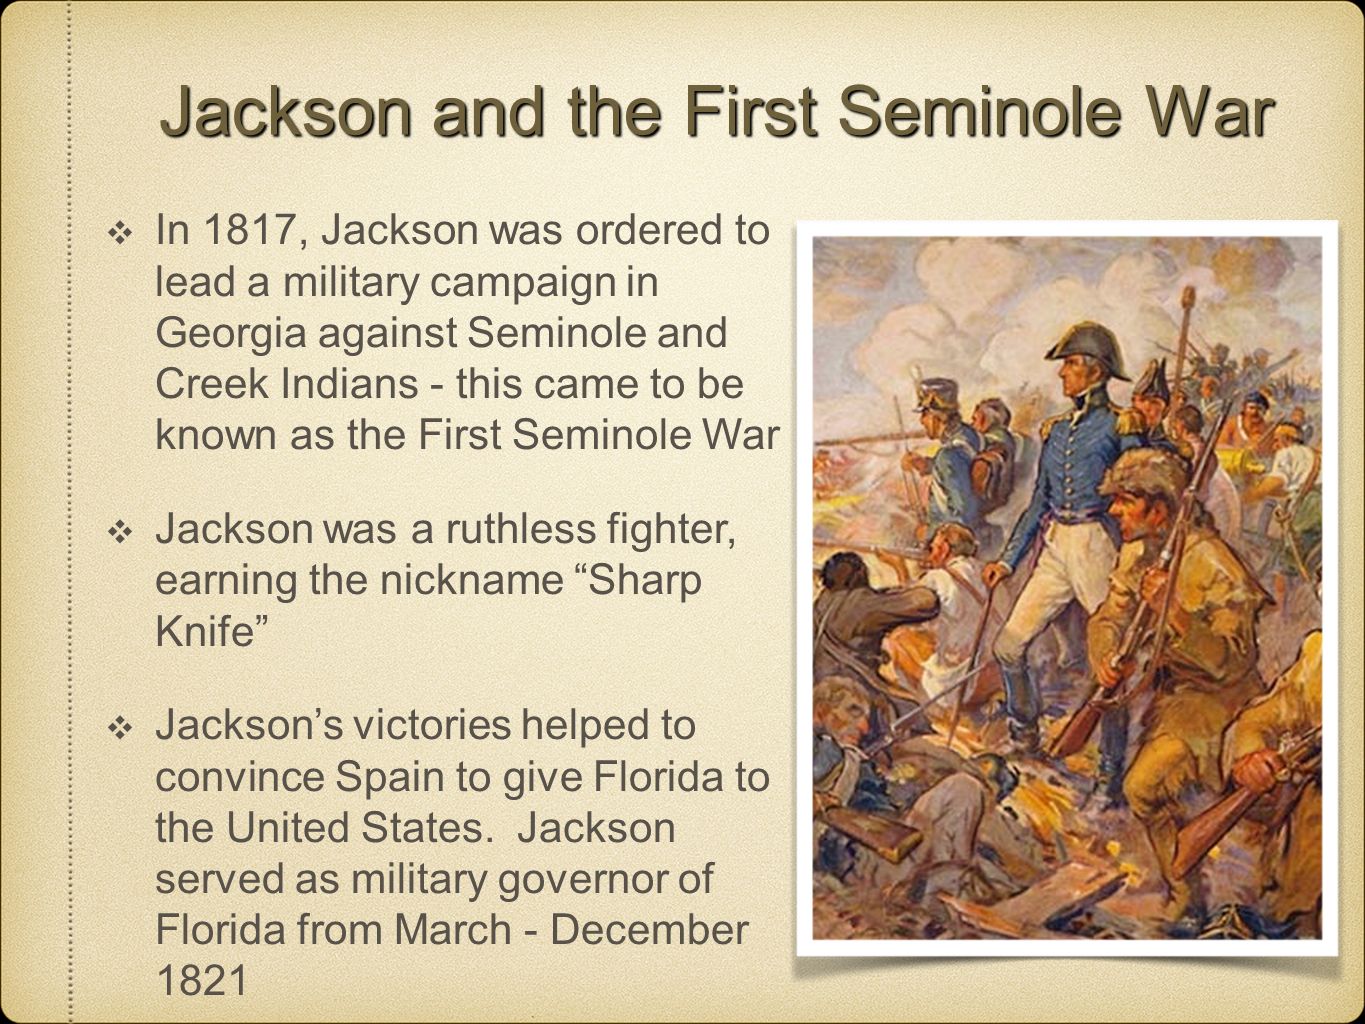 Jackson and the First Seminole War